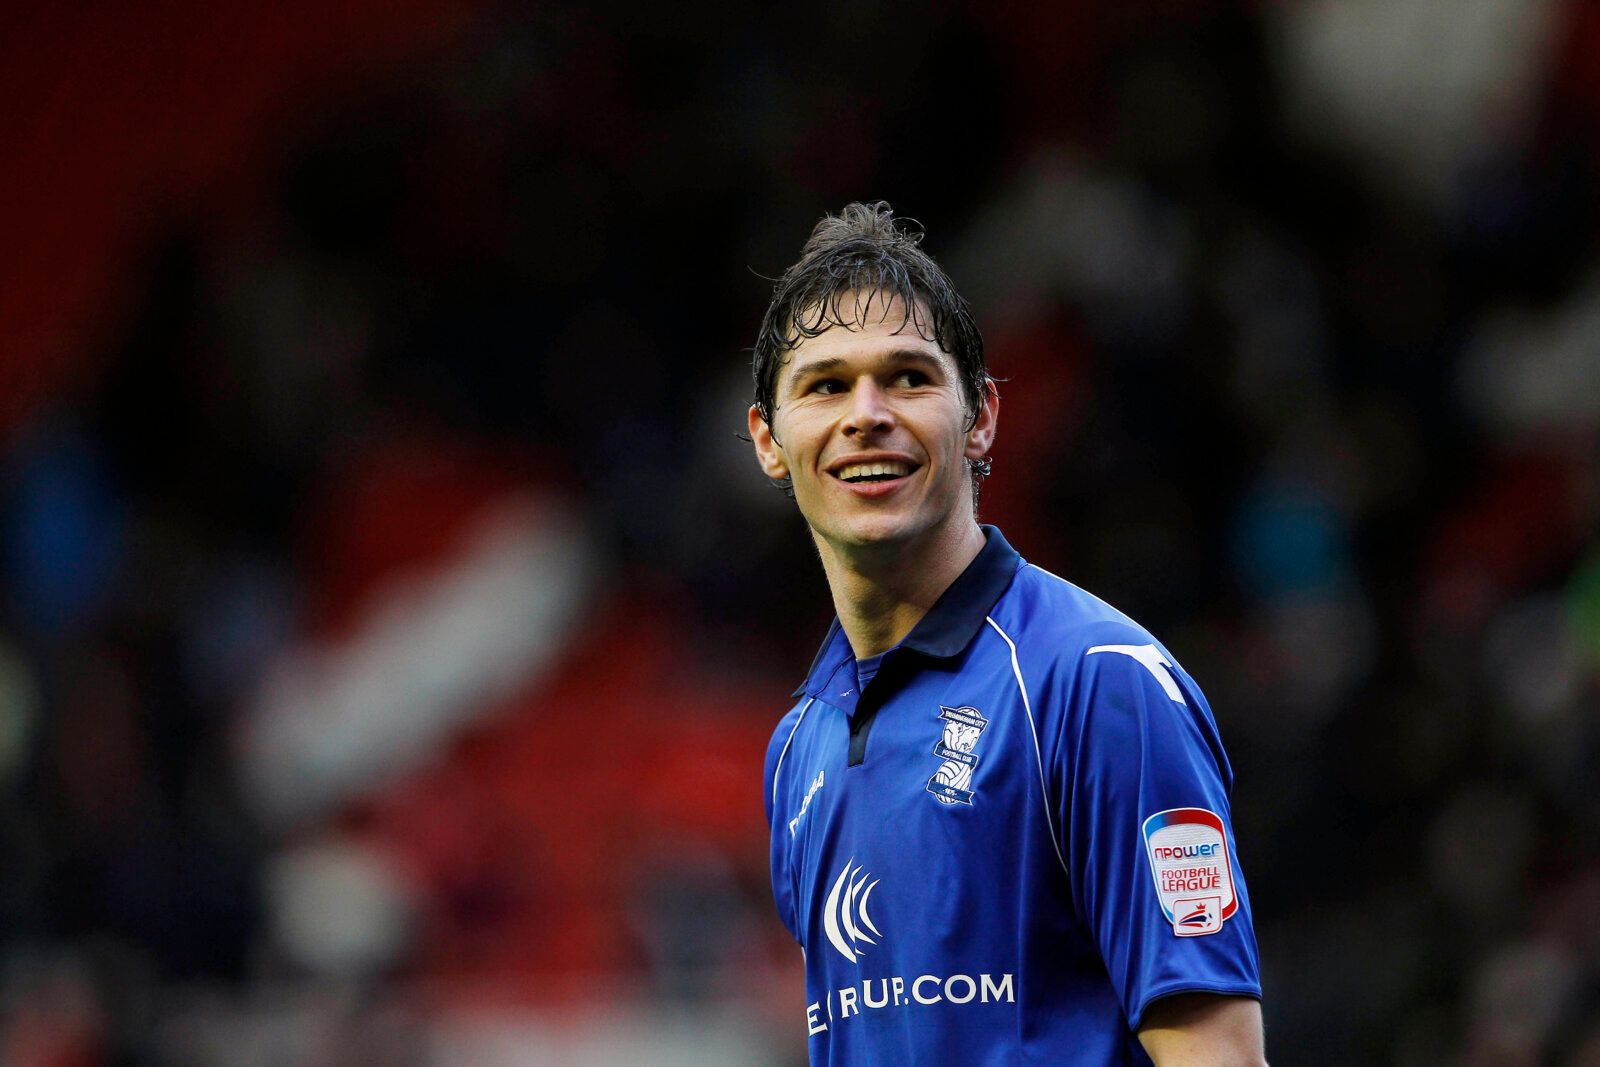 Football - Middlesbrough v Birmingham City - npower Football League Championship - The Riverside Stadium - 16/3/13 
Birmingham City's Nikola Zigic applauds the fans after the match 
Mandatory Credit: Action Images / Craig Brough 
Livepic 
EDITORIAL USE ONLY. No use with unauthorized audio, video, data, fixture lists, club/league logos or live services. Online in-match use limited to 45 images, no video emulation. No use in betting, games or single club/league/player publications.  Please contact